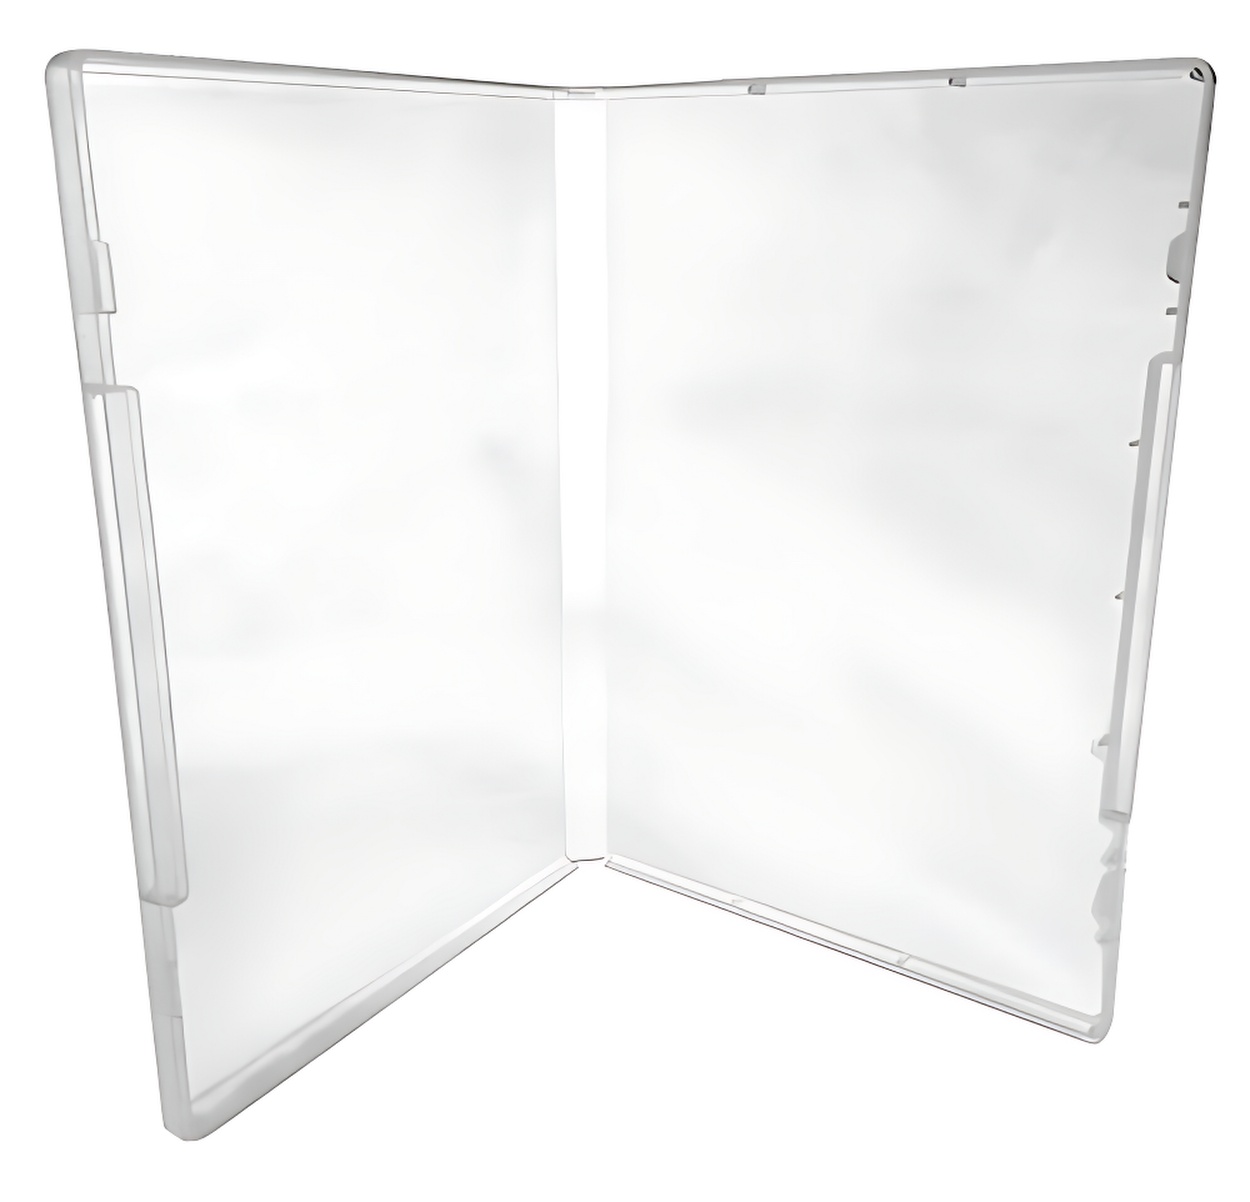 6 Clear Storage Cases 14mm for Rubber Stamps No Tabs (No Hub)